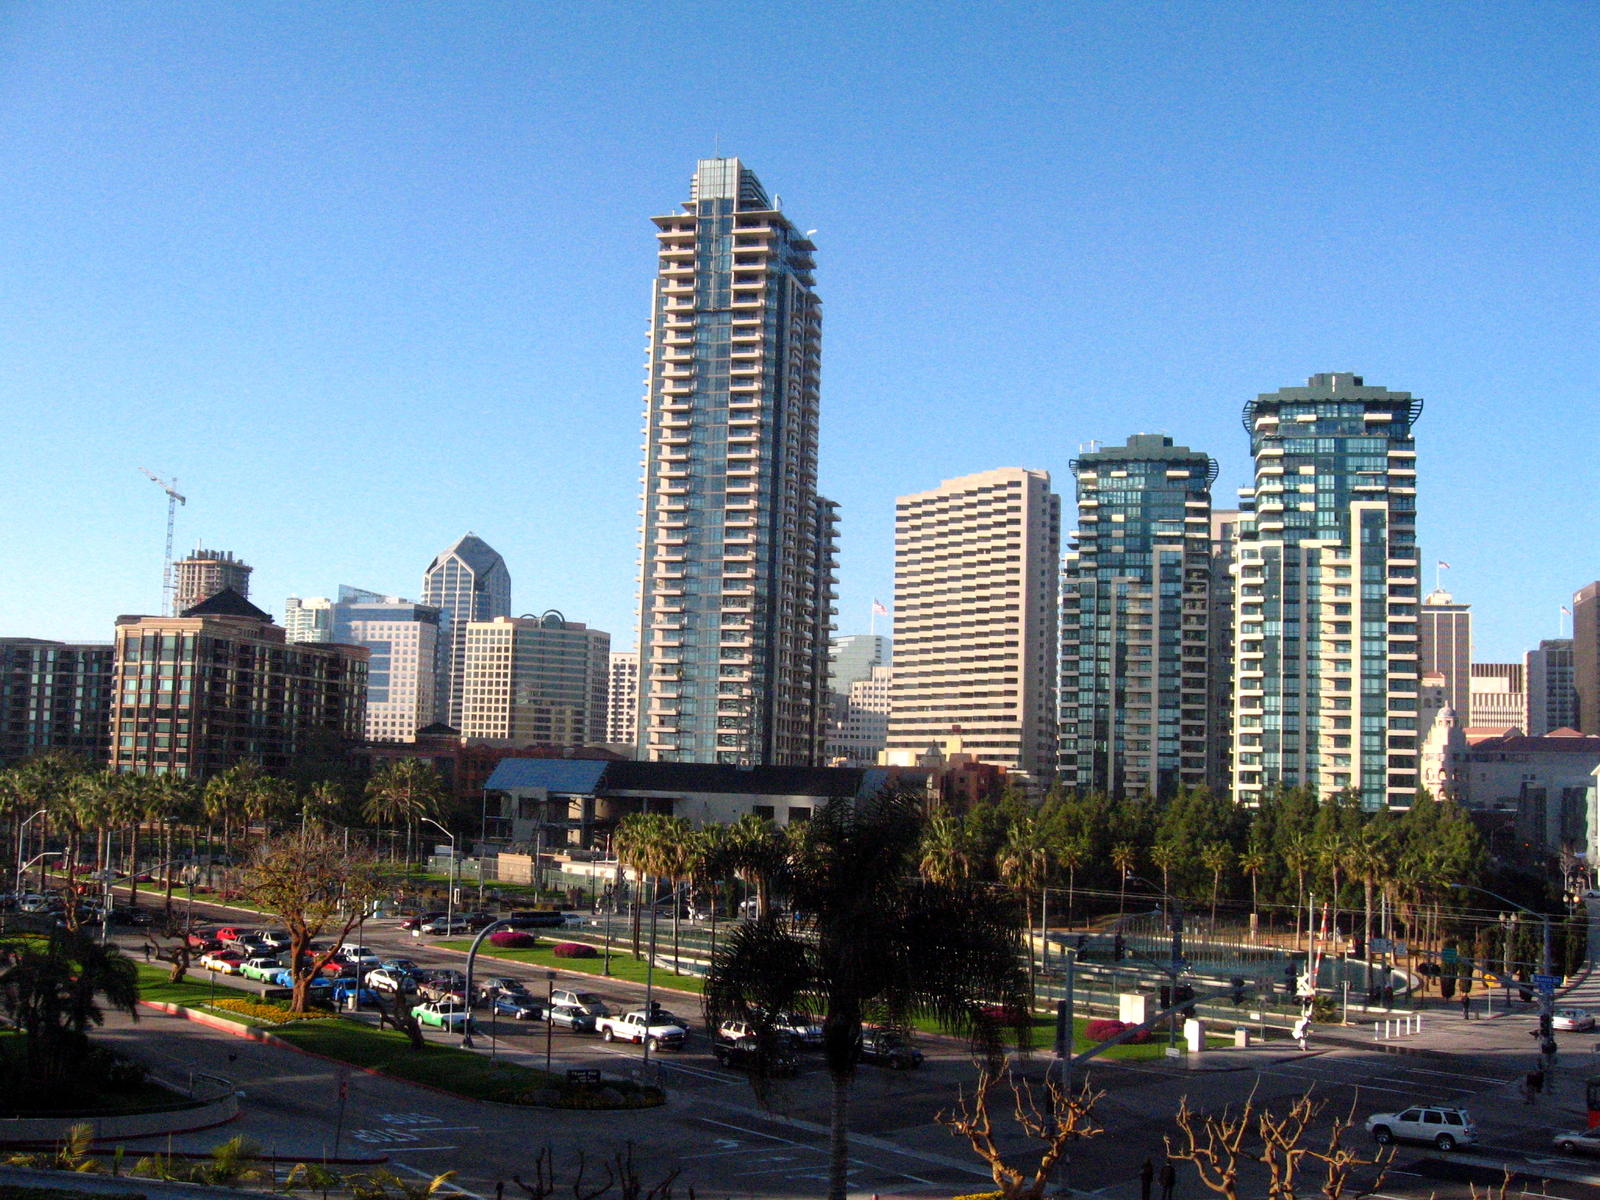 Most Modern City? (downtown, freeway, major, area) - Urban Planning ...